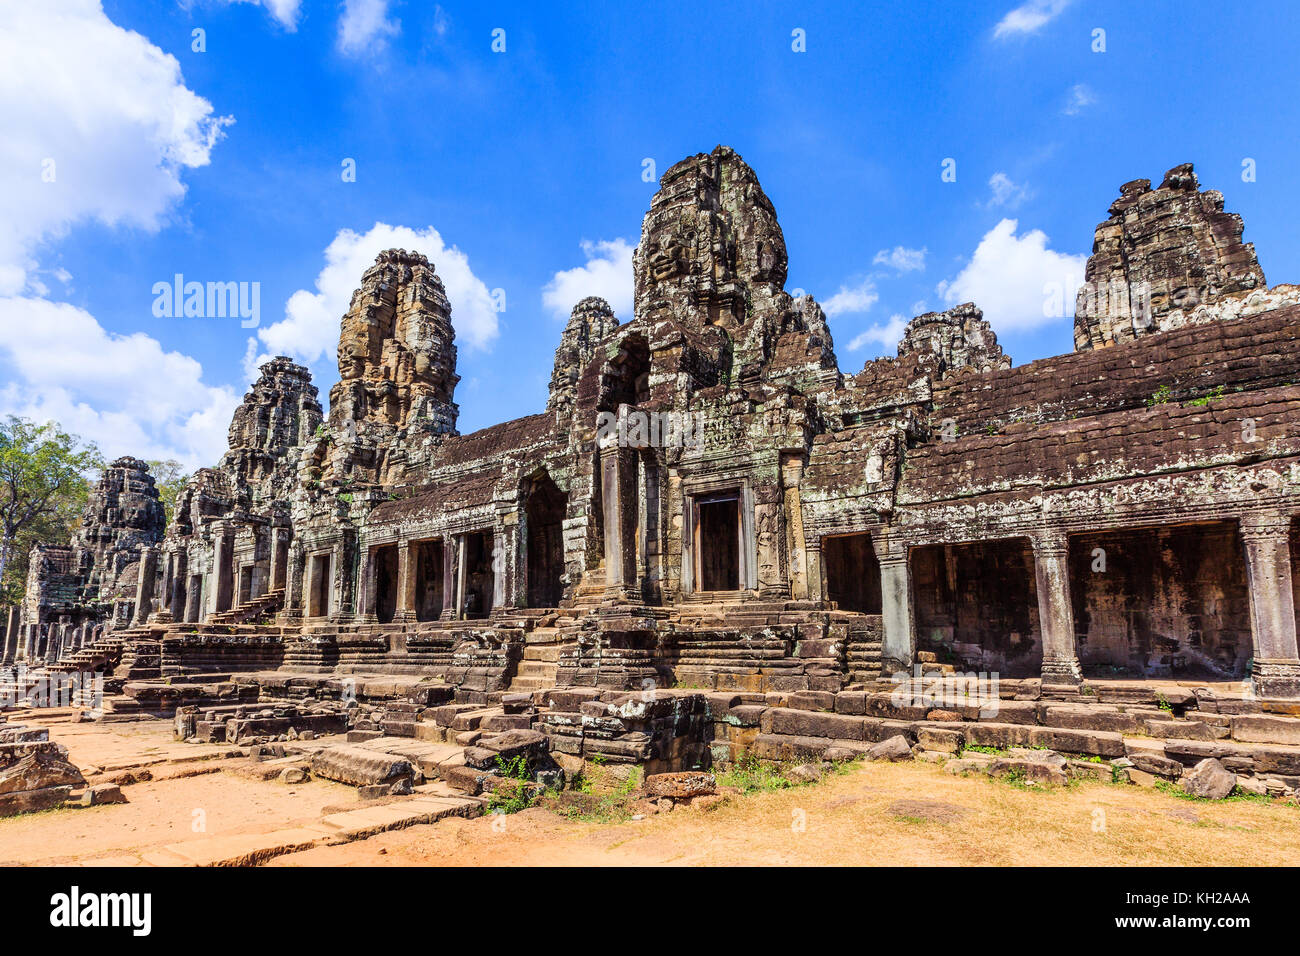 Angkor, Cambodia. The inner gallery of the Bayon temple. Stock Photo